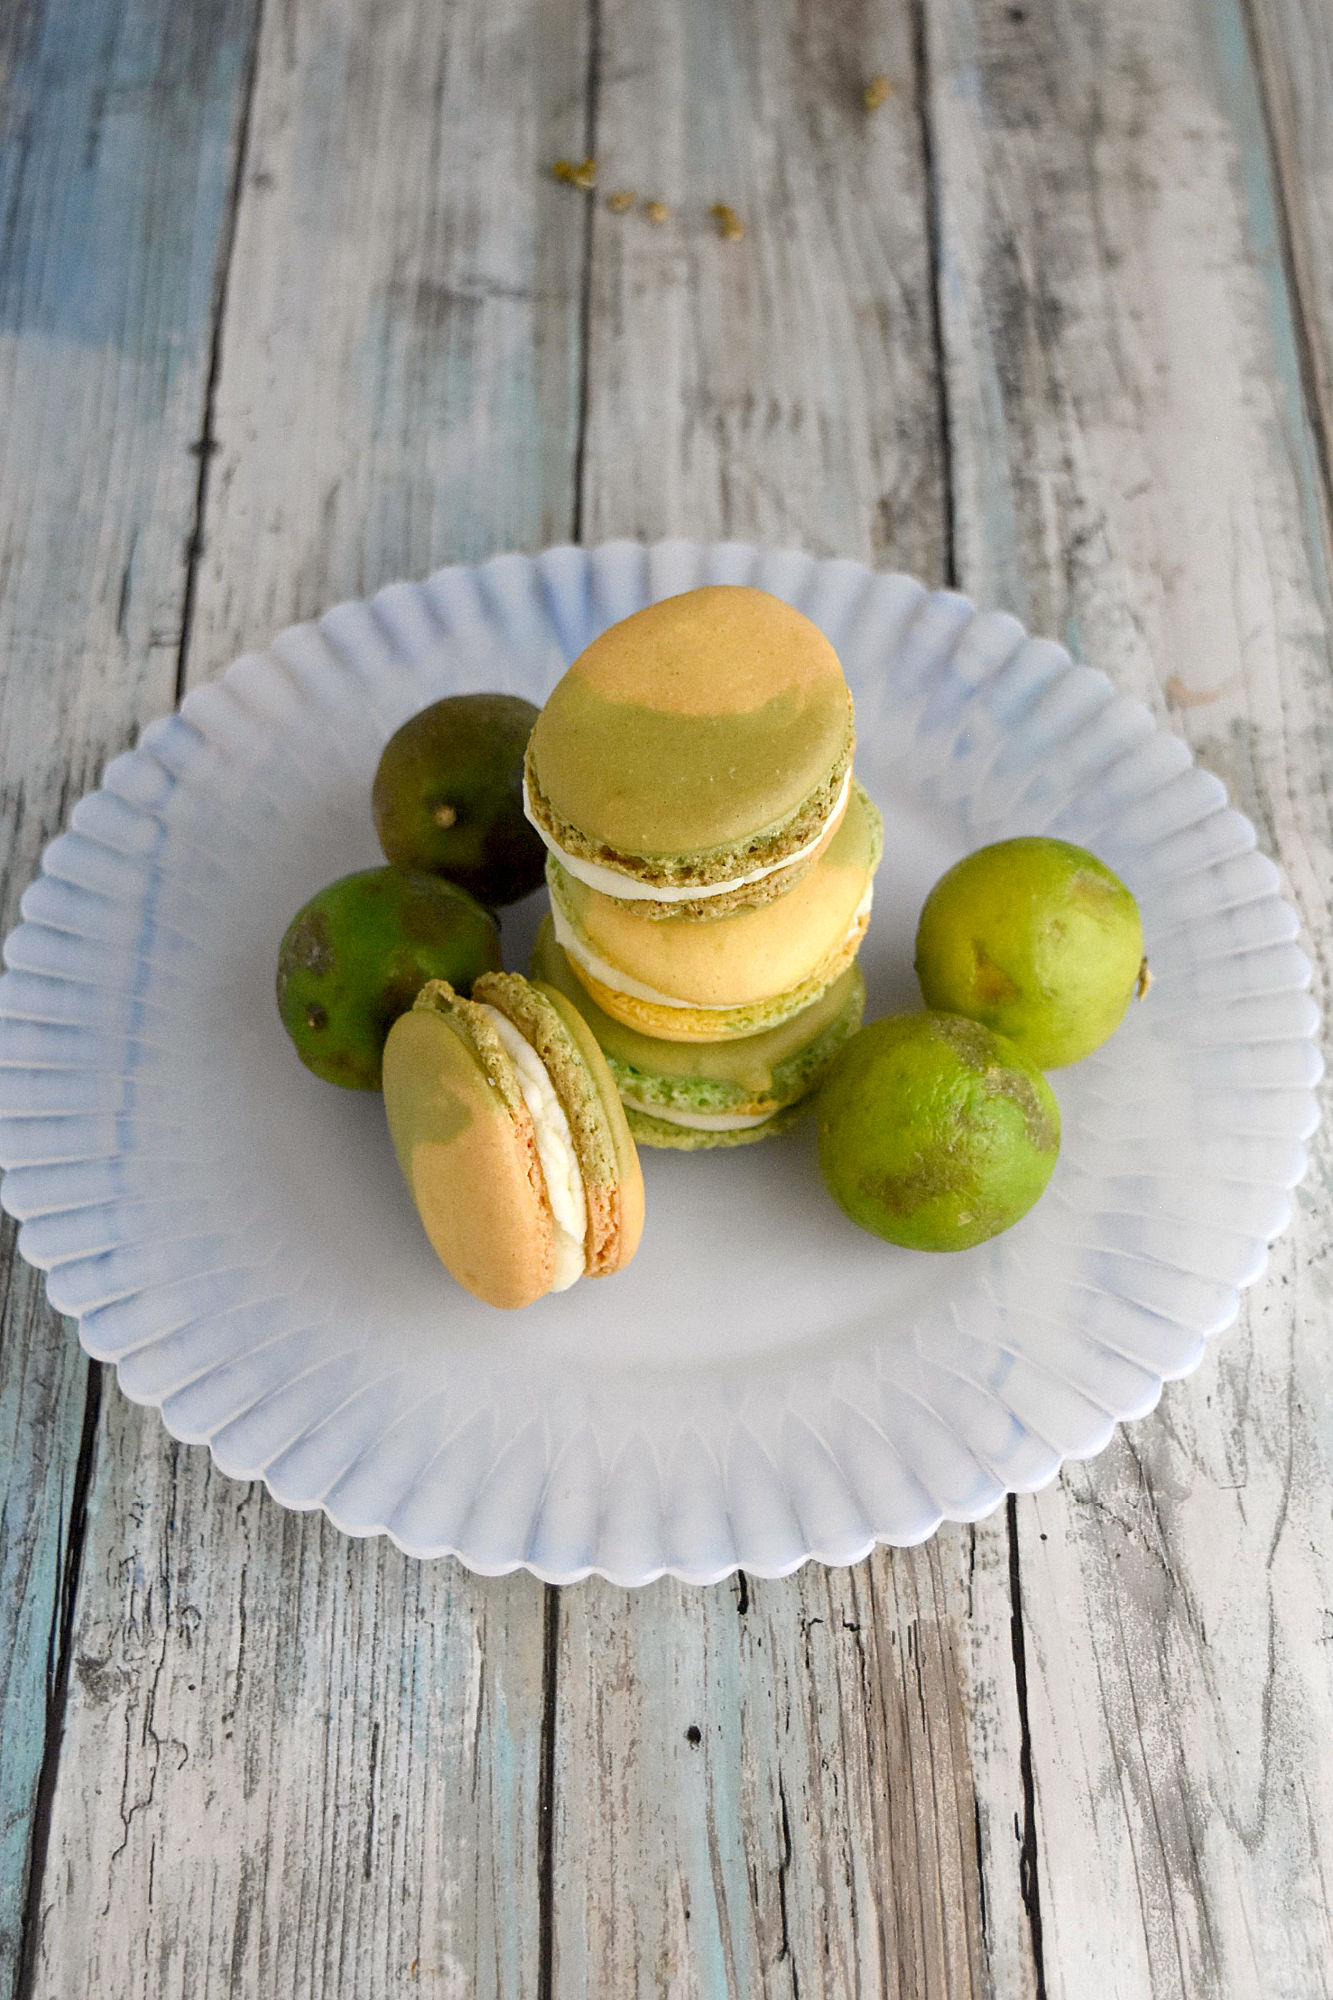 Lemon Lime Macaron have lemon in the shells and key lime buttercream filling.  They're the perfect sweet tart treat.